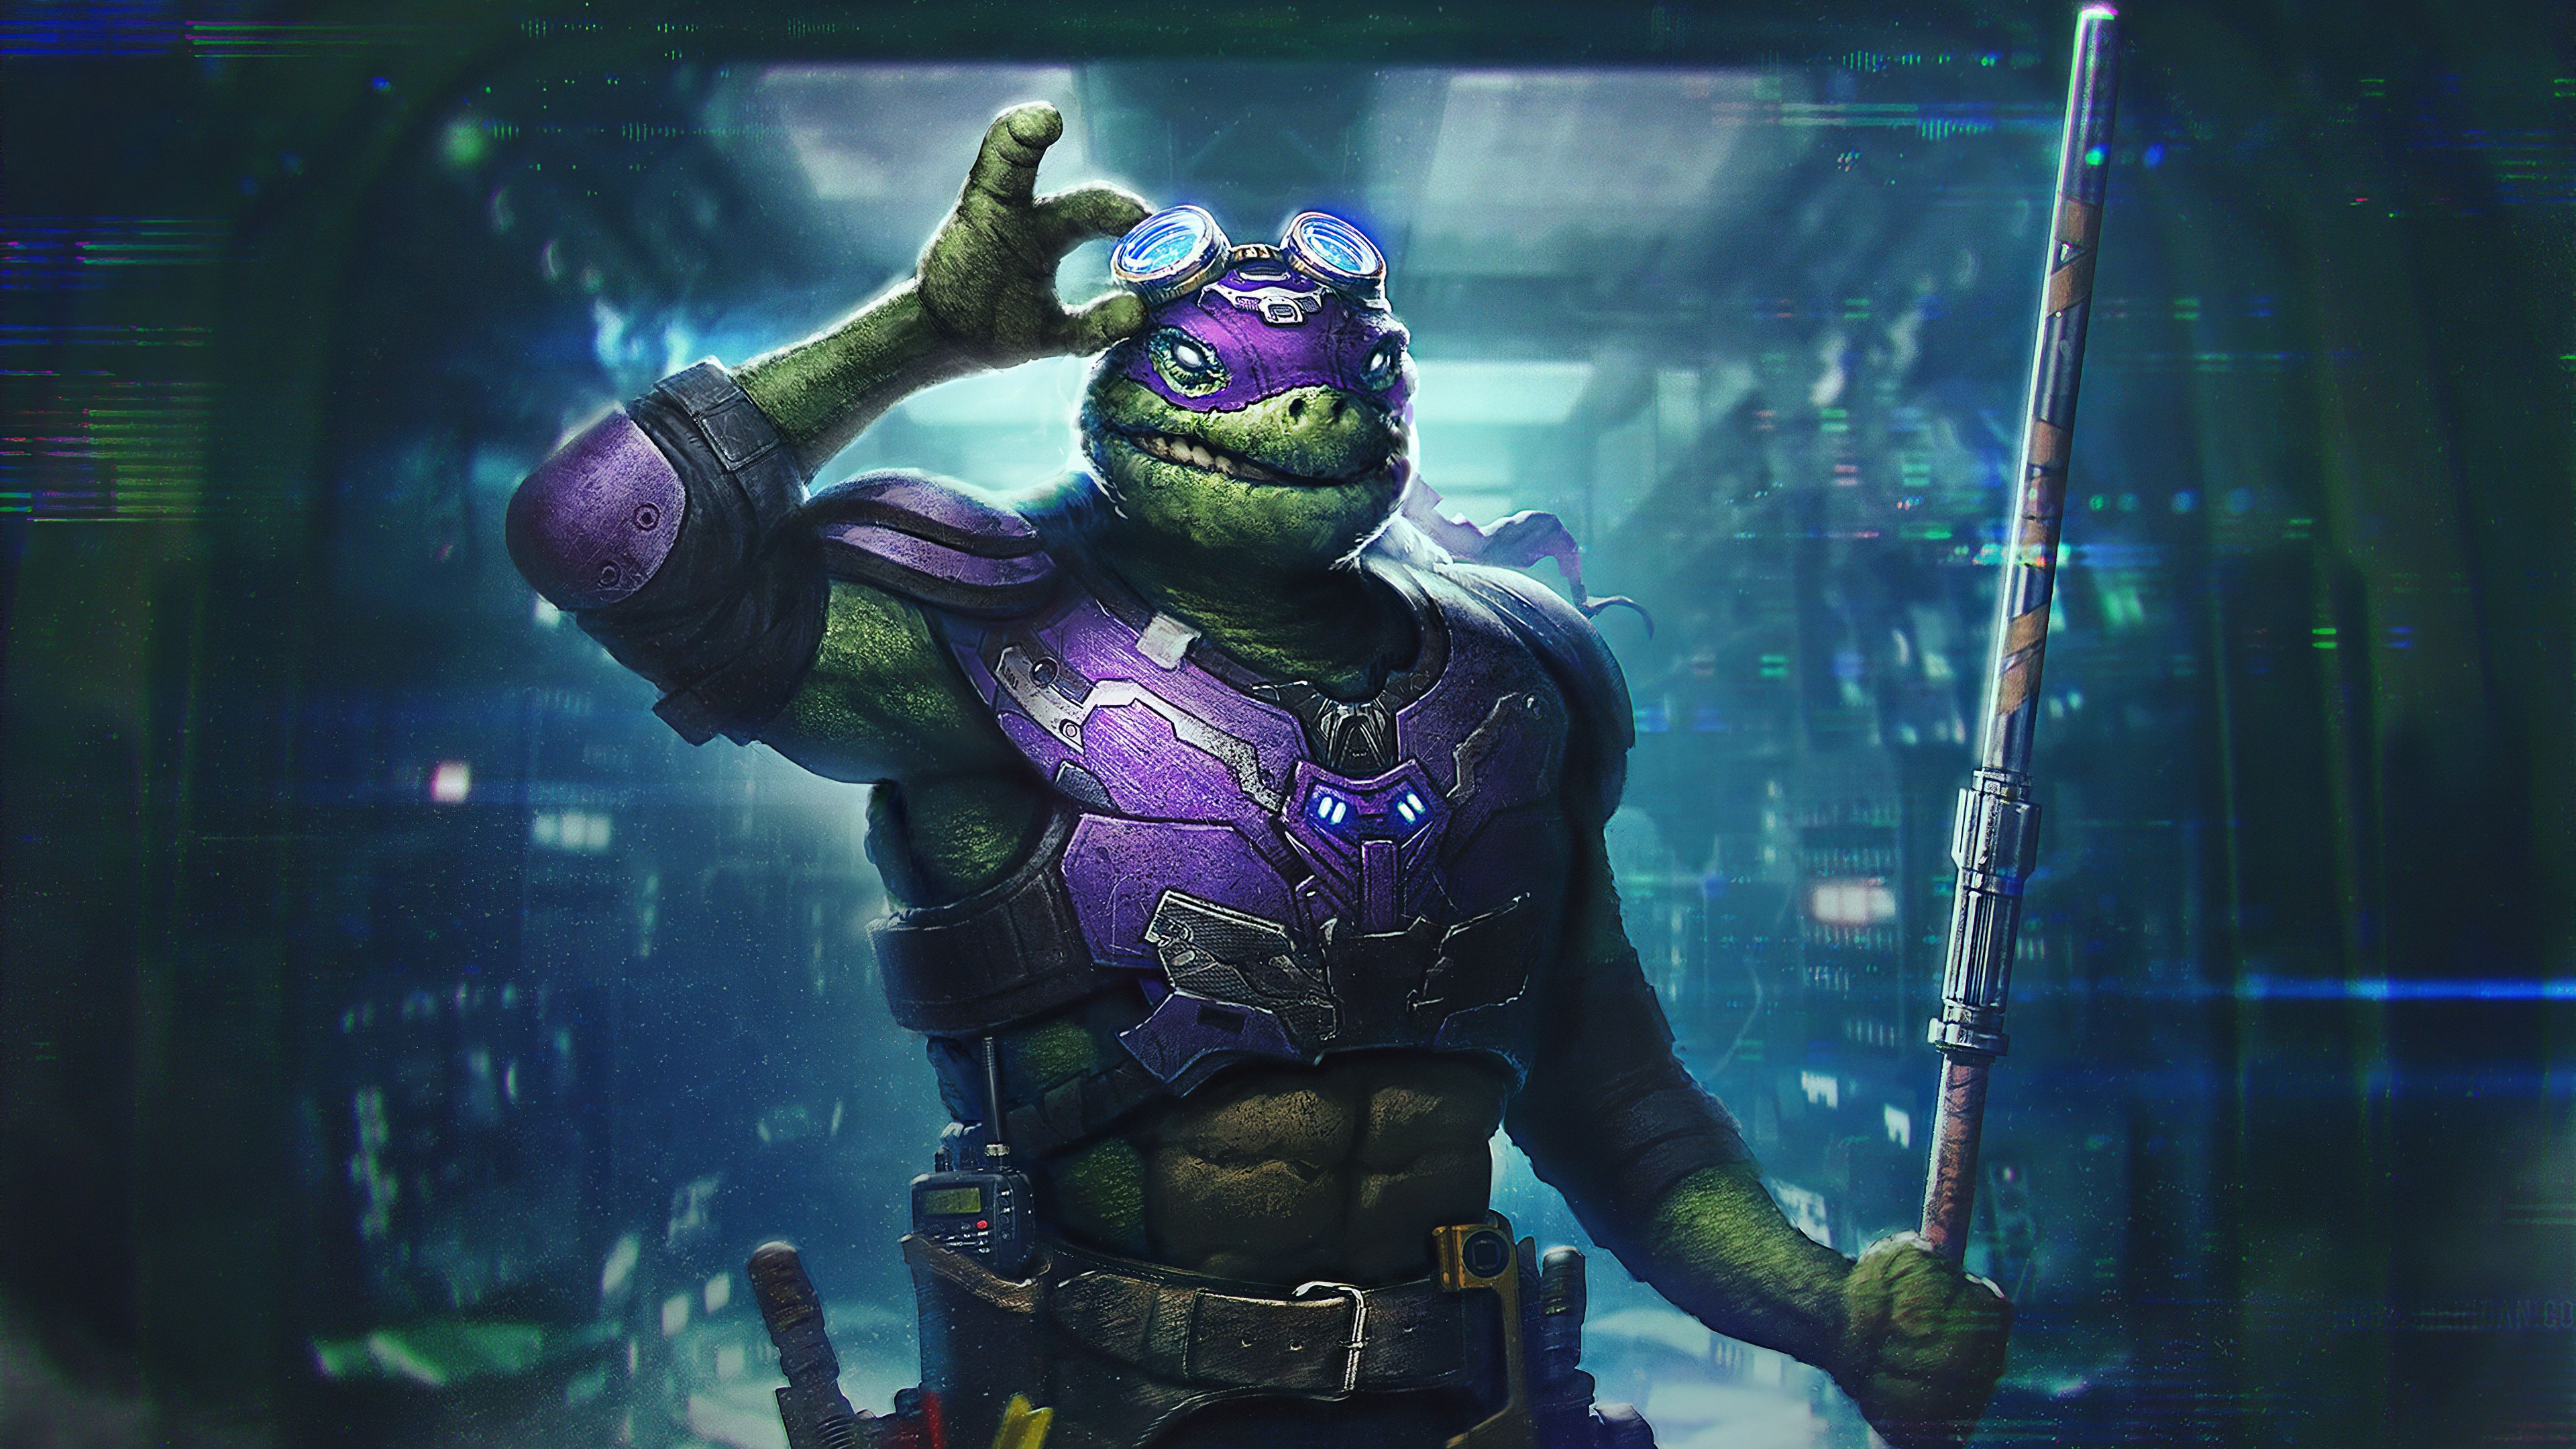 TMNT Donnie 4k, HD Superheroes, 4k Wallpaper, Image, Background, Photo and Picture